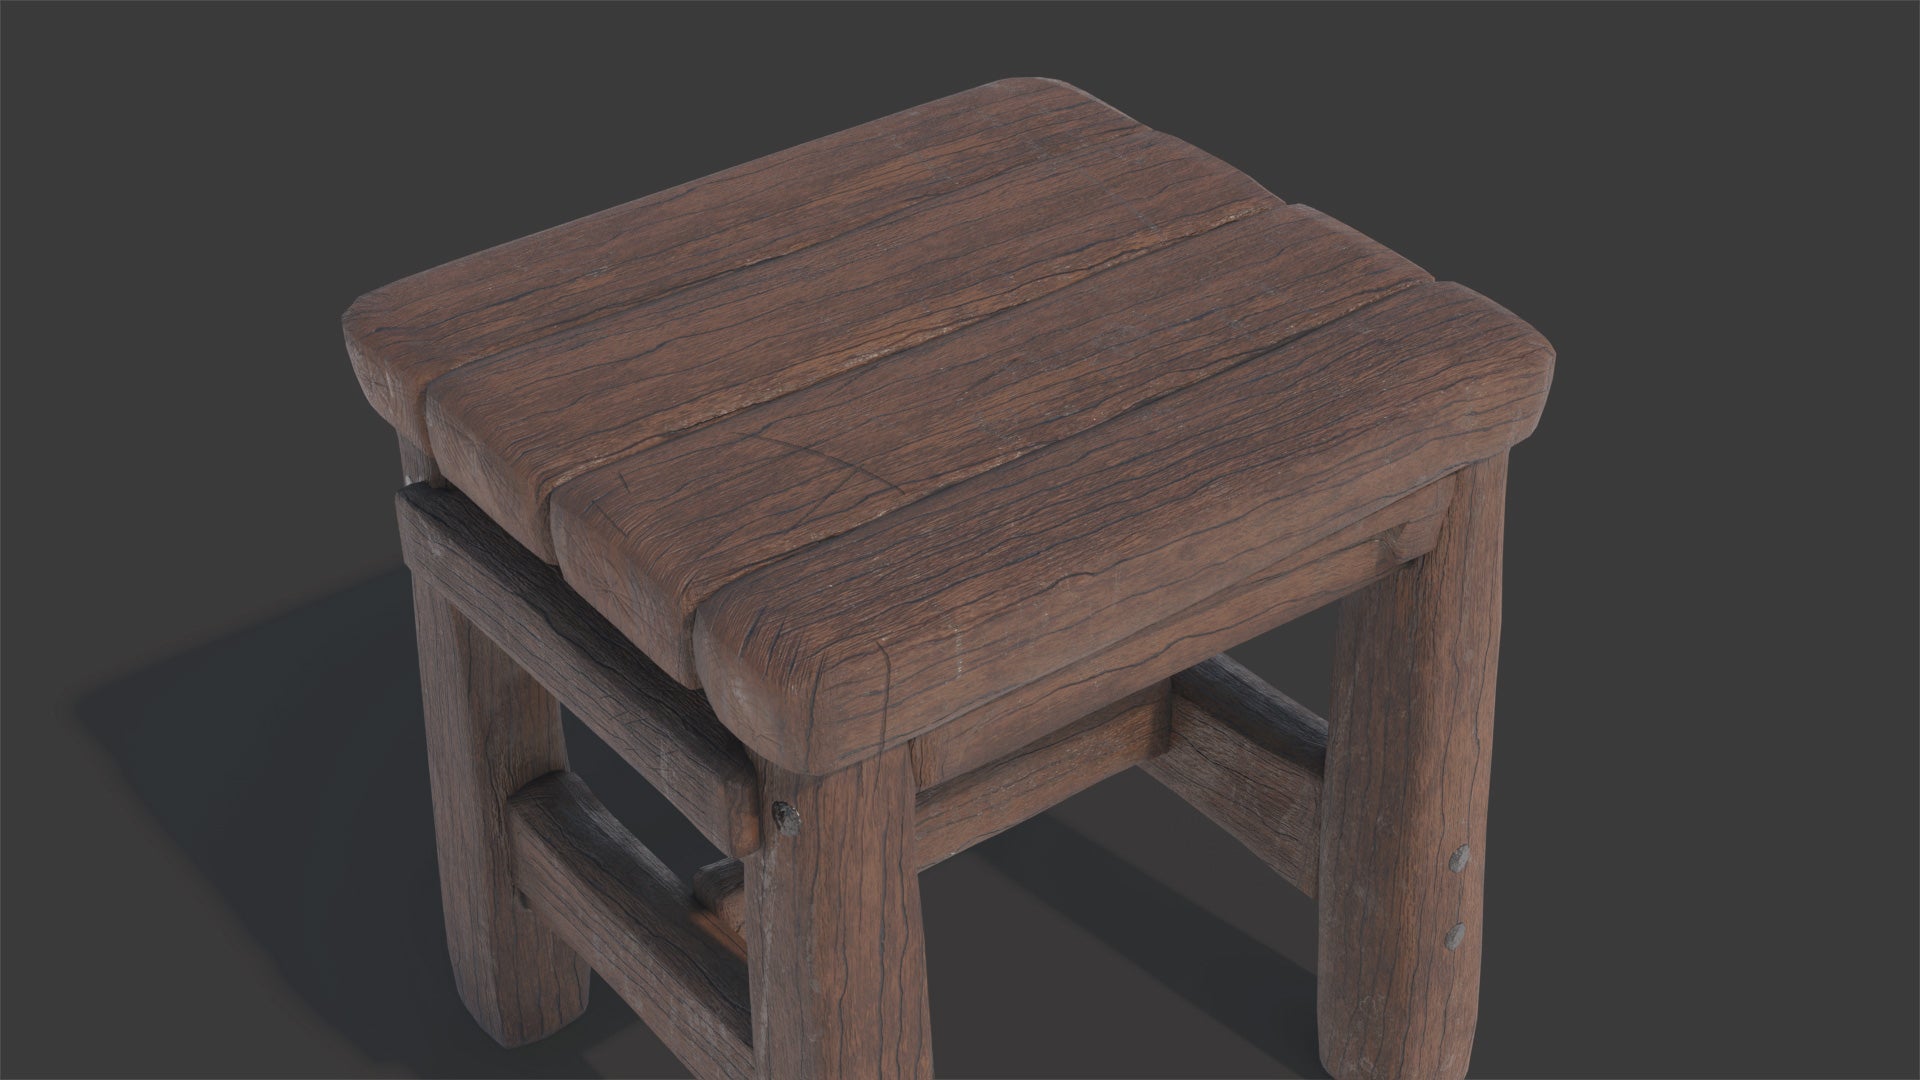 3D model of a rustic wooden stool, seen from the top, looks handmade and it would fit well in a medieval setting. It had low polycount and still looks very realistic!